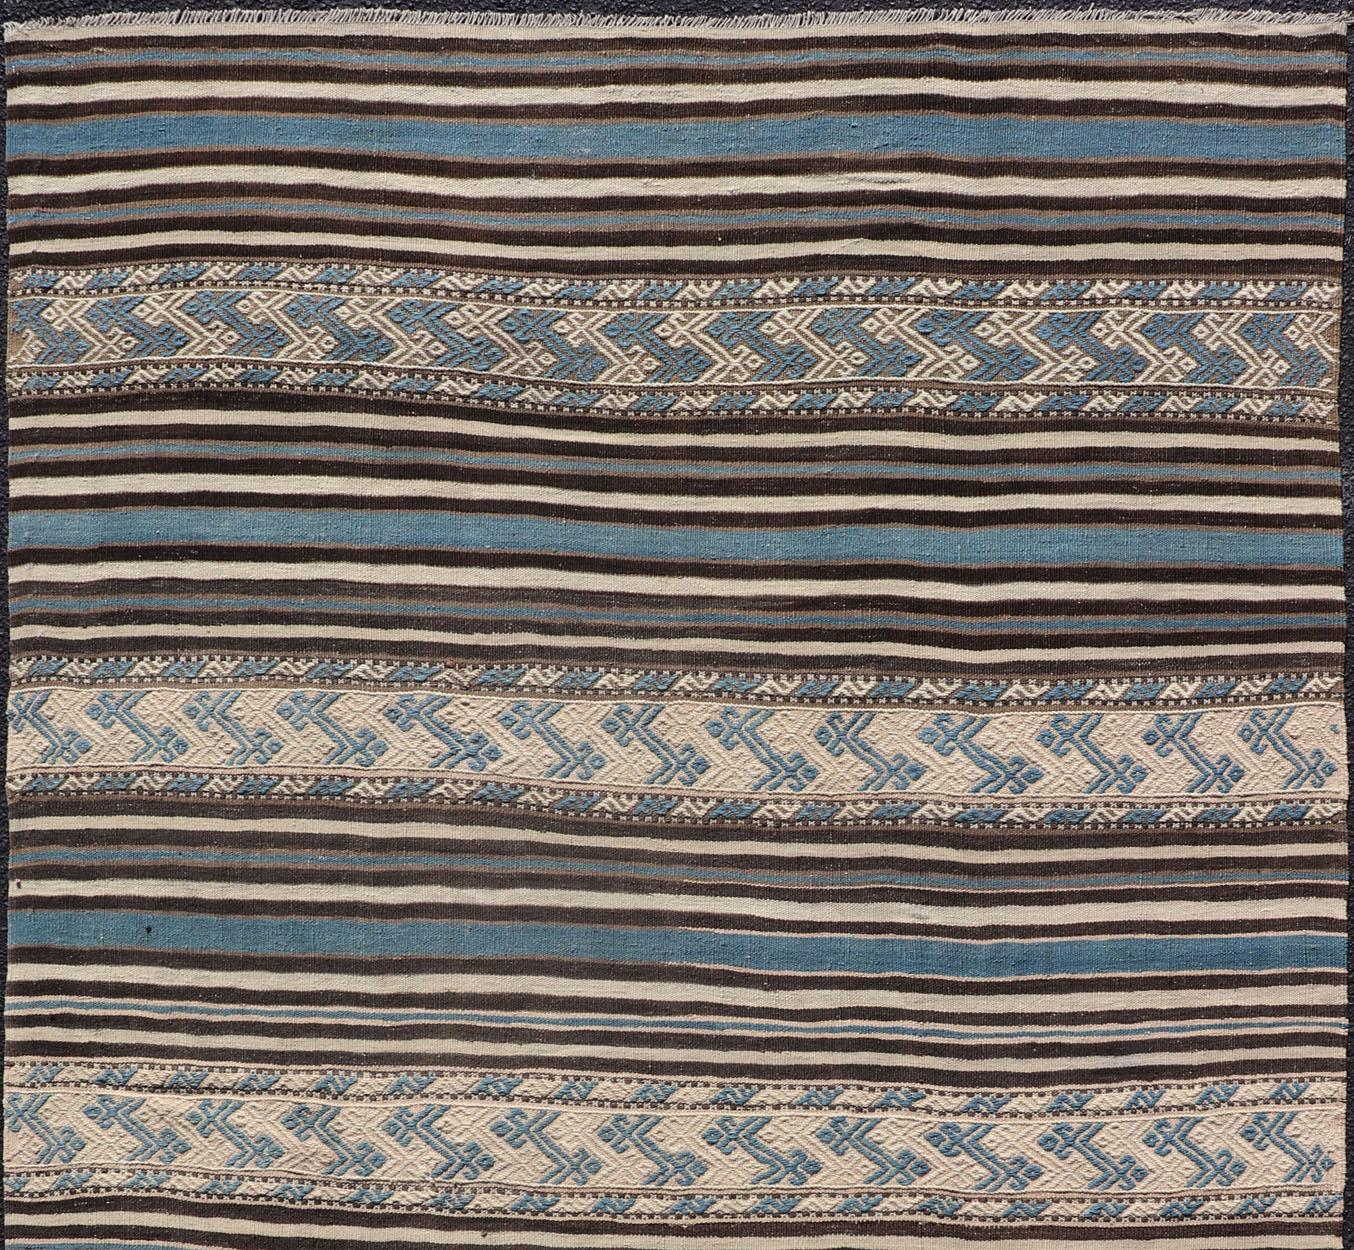 Flat-woven Kilim in brown, cream, and blue, rug TU-NED-1011, country of origin / type: Turkey / Kilim, circa 1950

This Turkish Kilim flat-woven is perfectly suited for a variety of interiors. The strong tones includes dark brown, cream, and blue